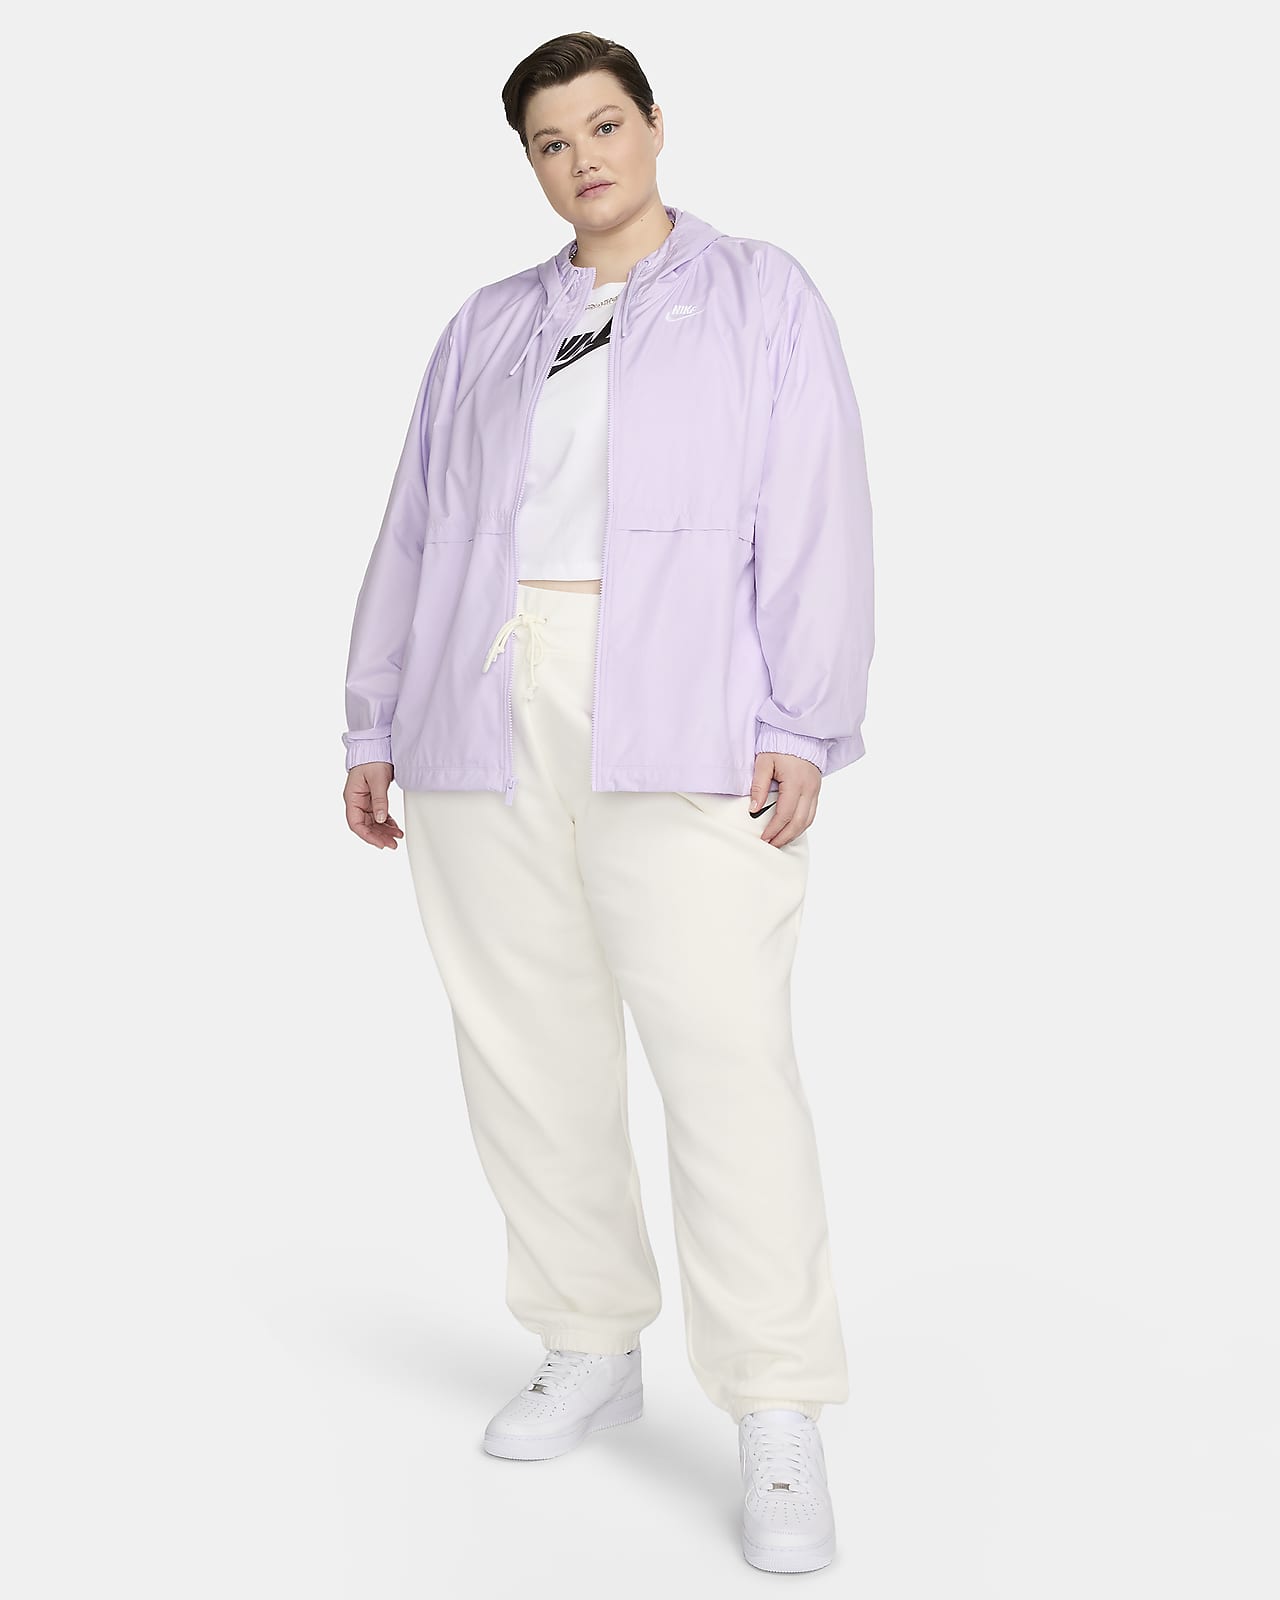 Fashion Look Featuring Nike Plus Size Jackets and Nike Activewear Jackets  by rrayyme - ShopStyle